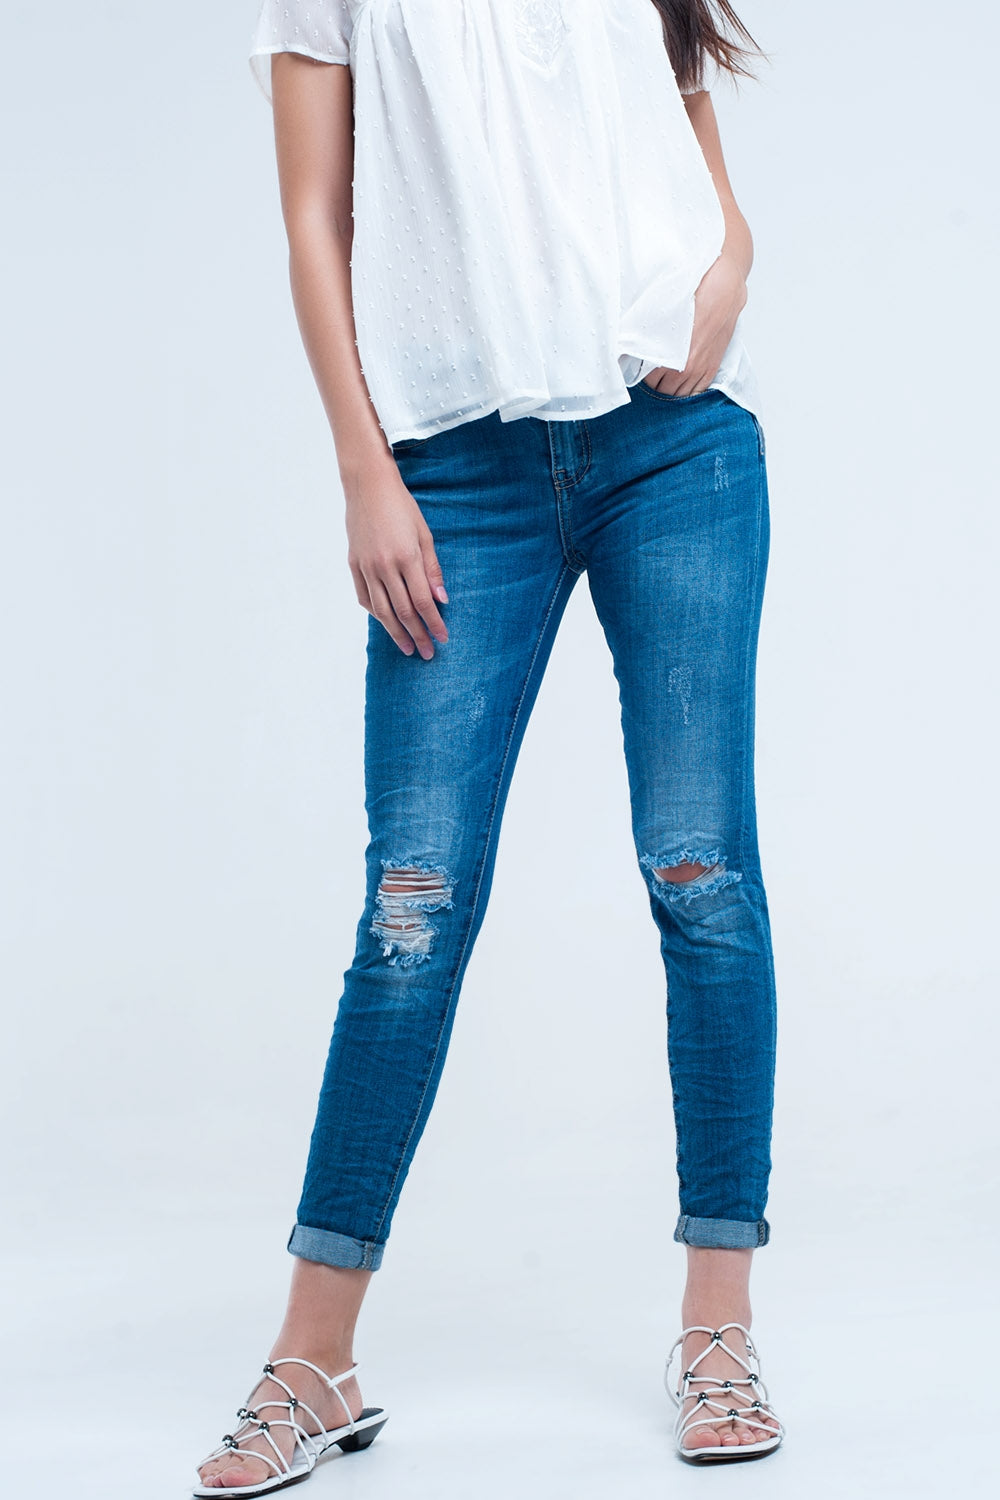 Skinny elastic jeans with rips